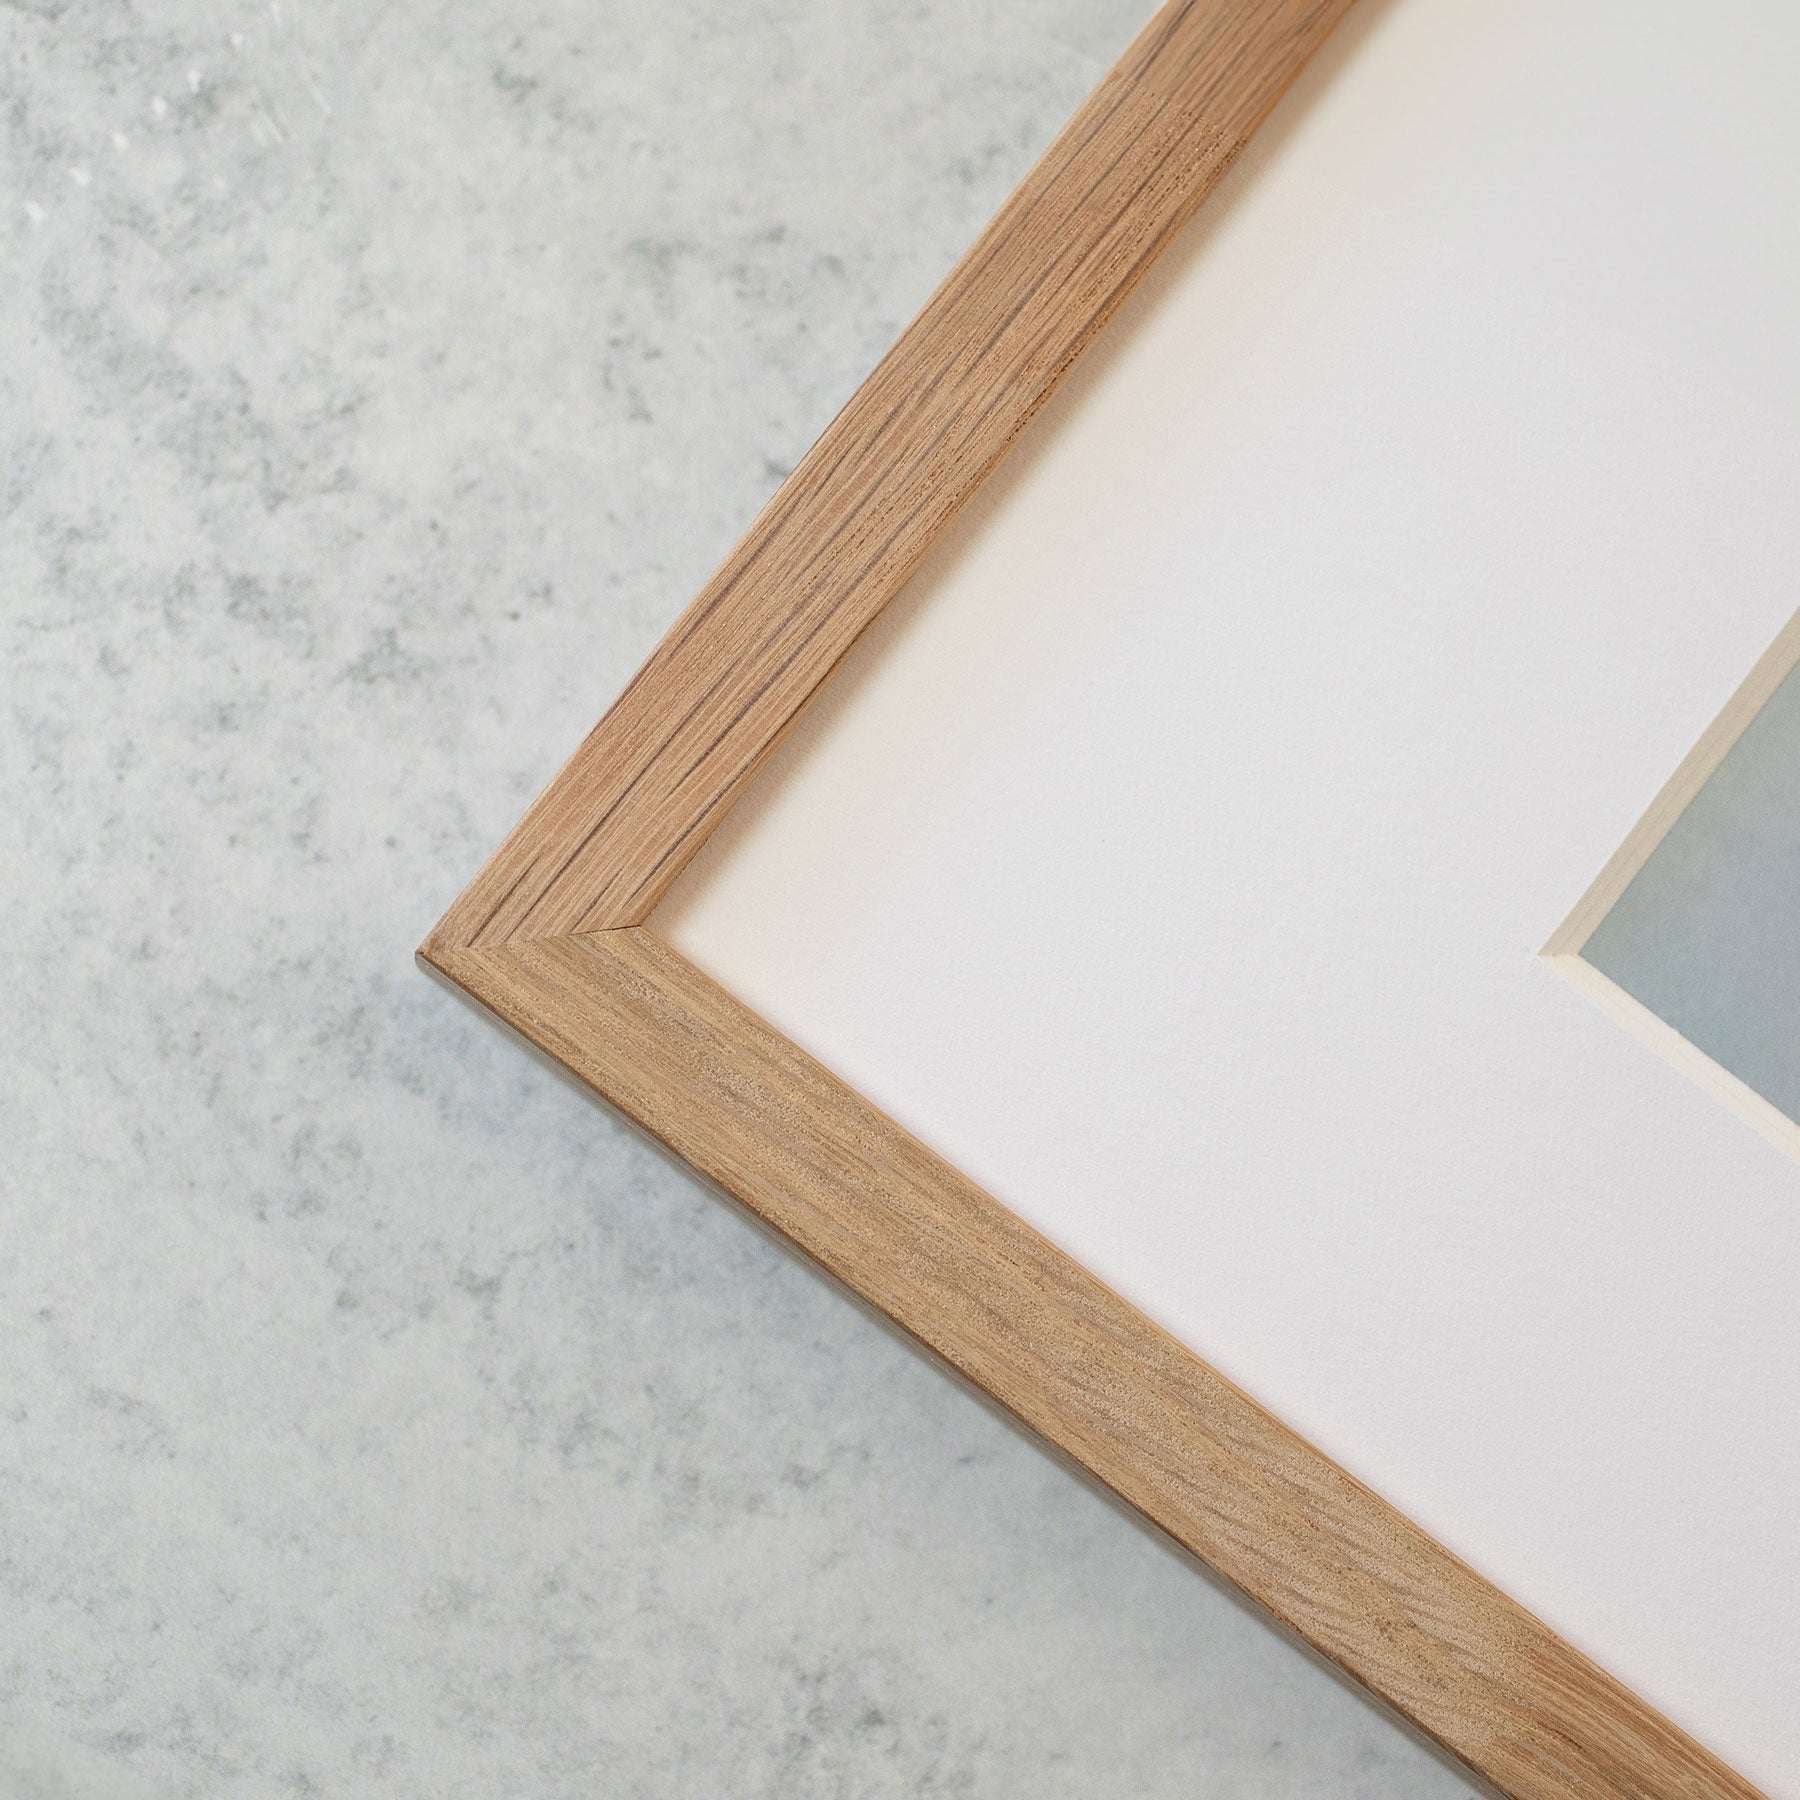 Close-up of an Offley Green wooden picture frame corner on archival photographic paper background, showcasing the wood grain and quality finish against a textured grey surface.